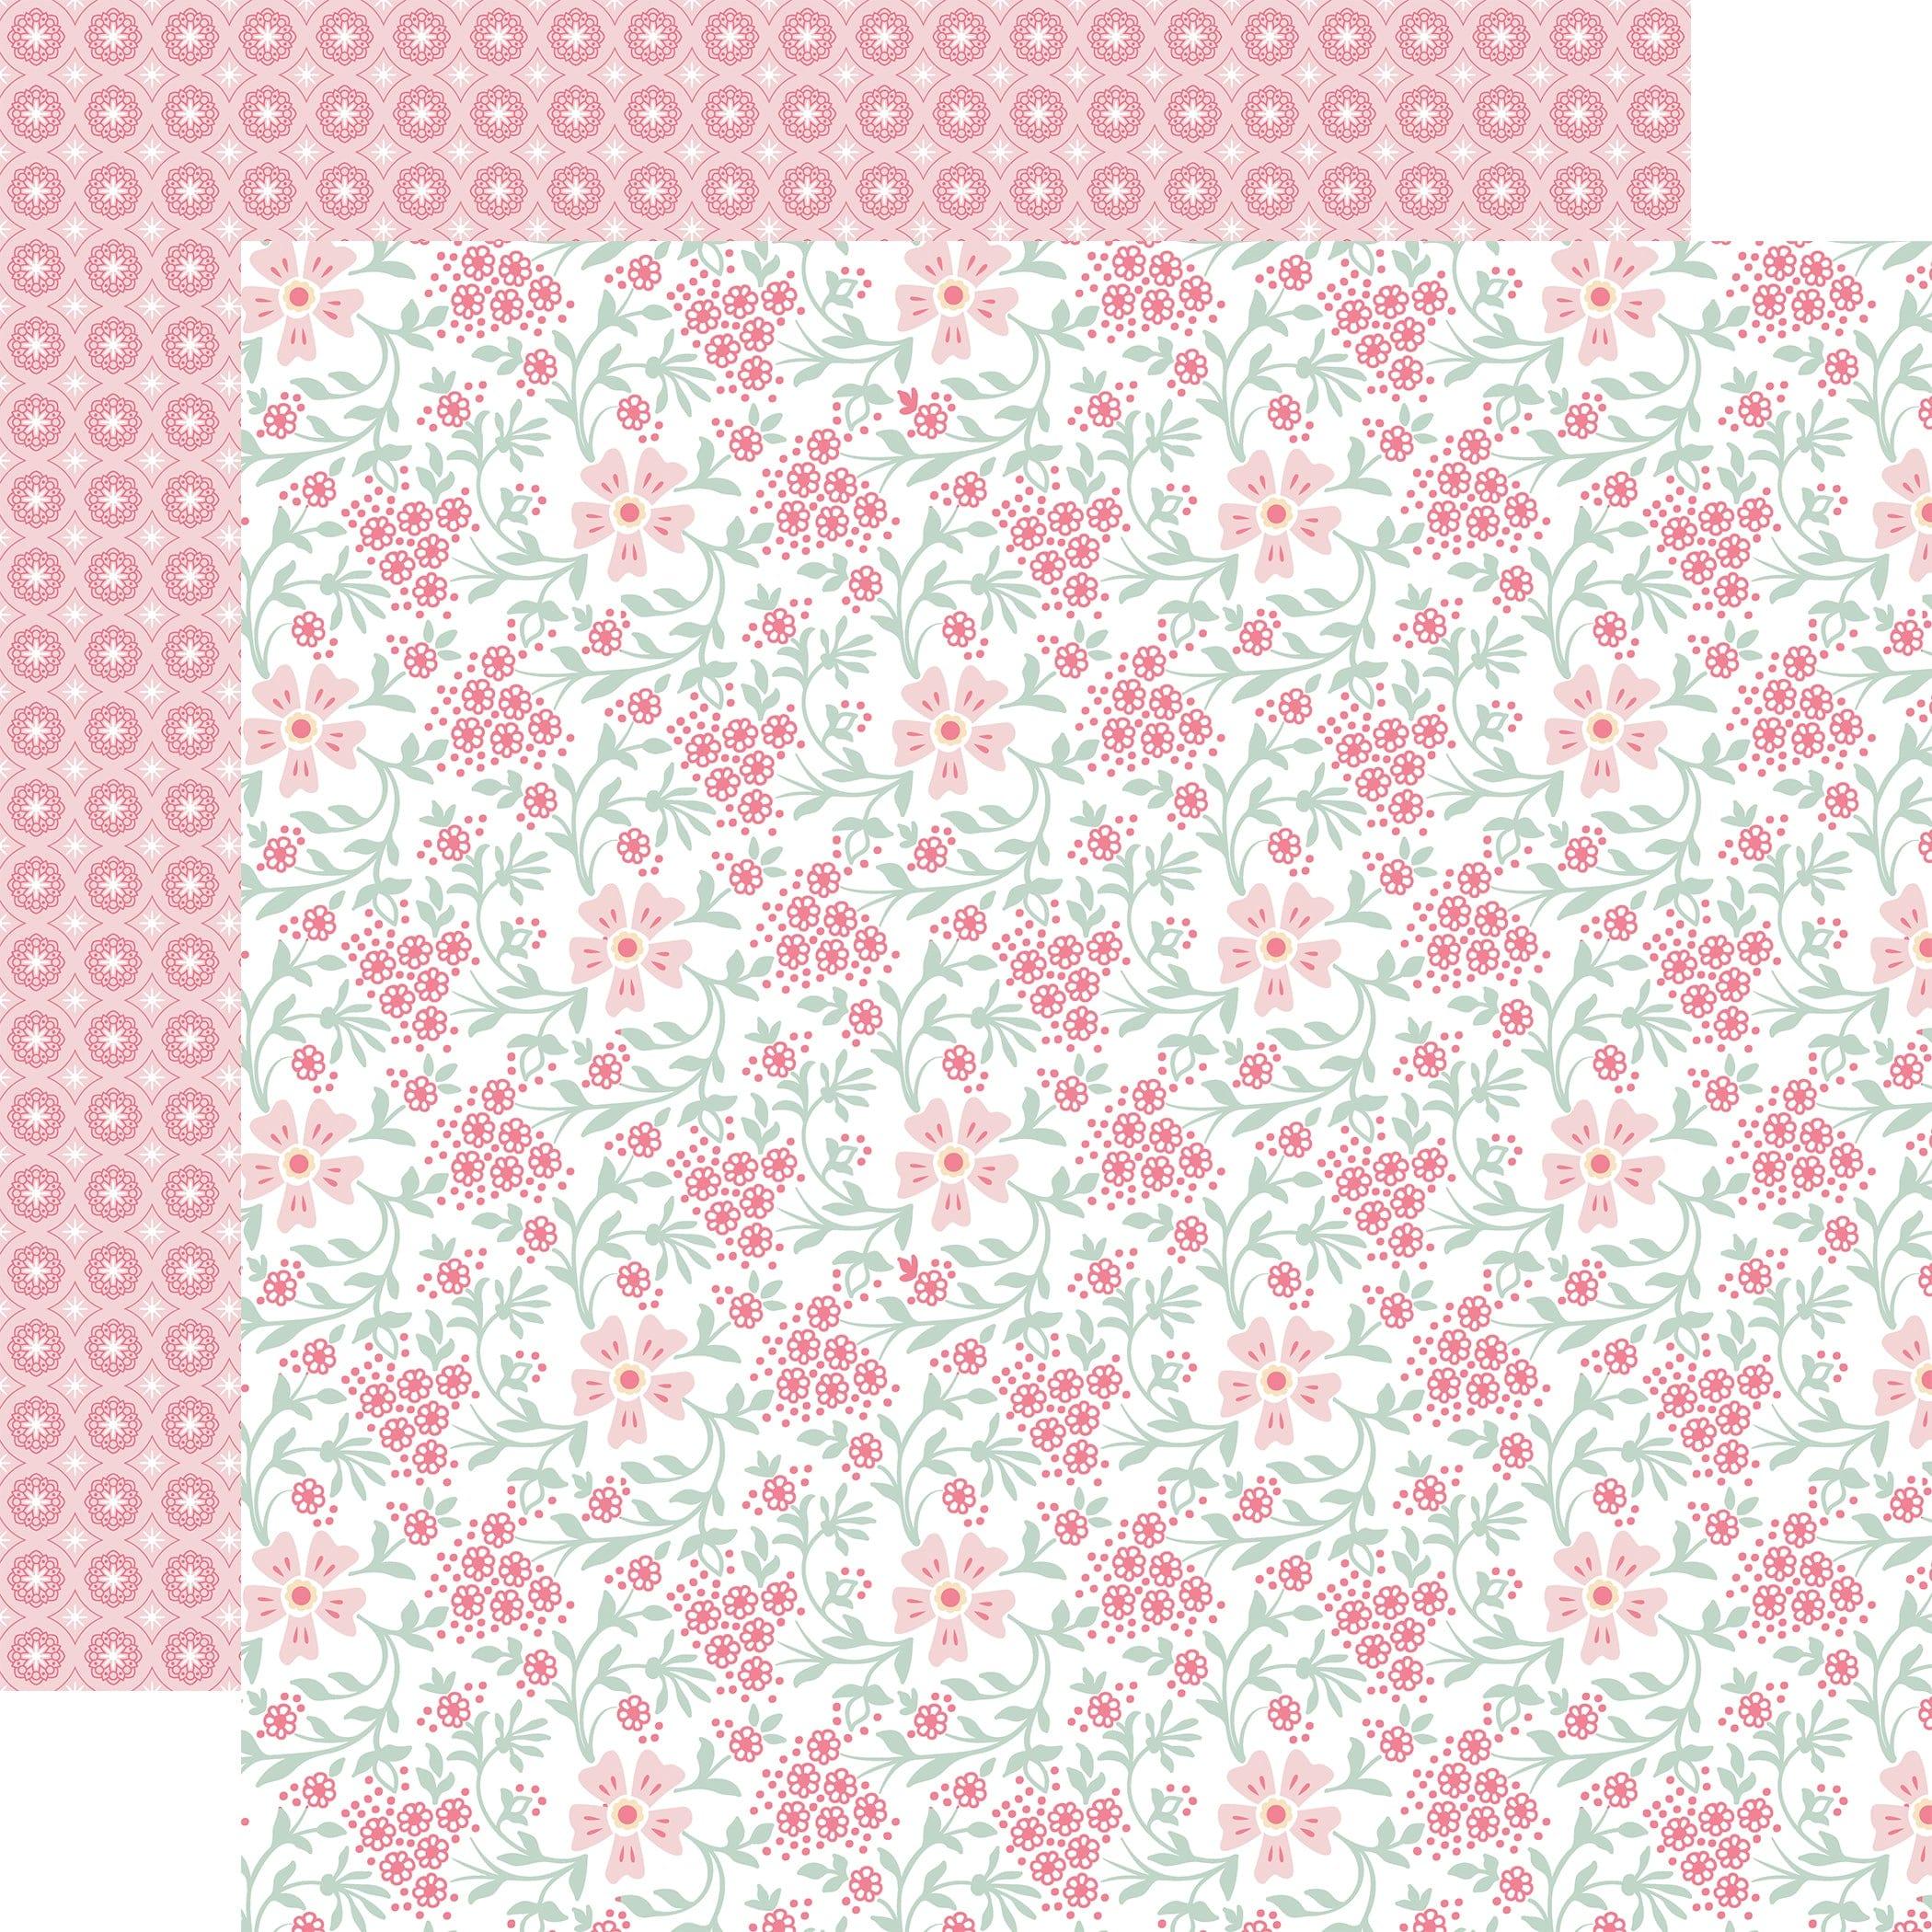 Our Little Princess Collection Fairytale Flowers 12 x 12 Double-Sided Scrapbook Paper by Echo Park Paper - Scrapbook Supply Companies